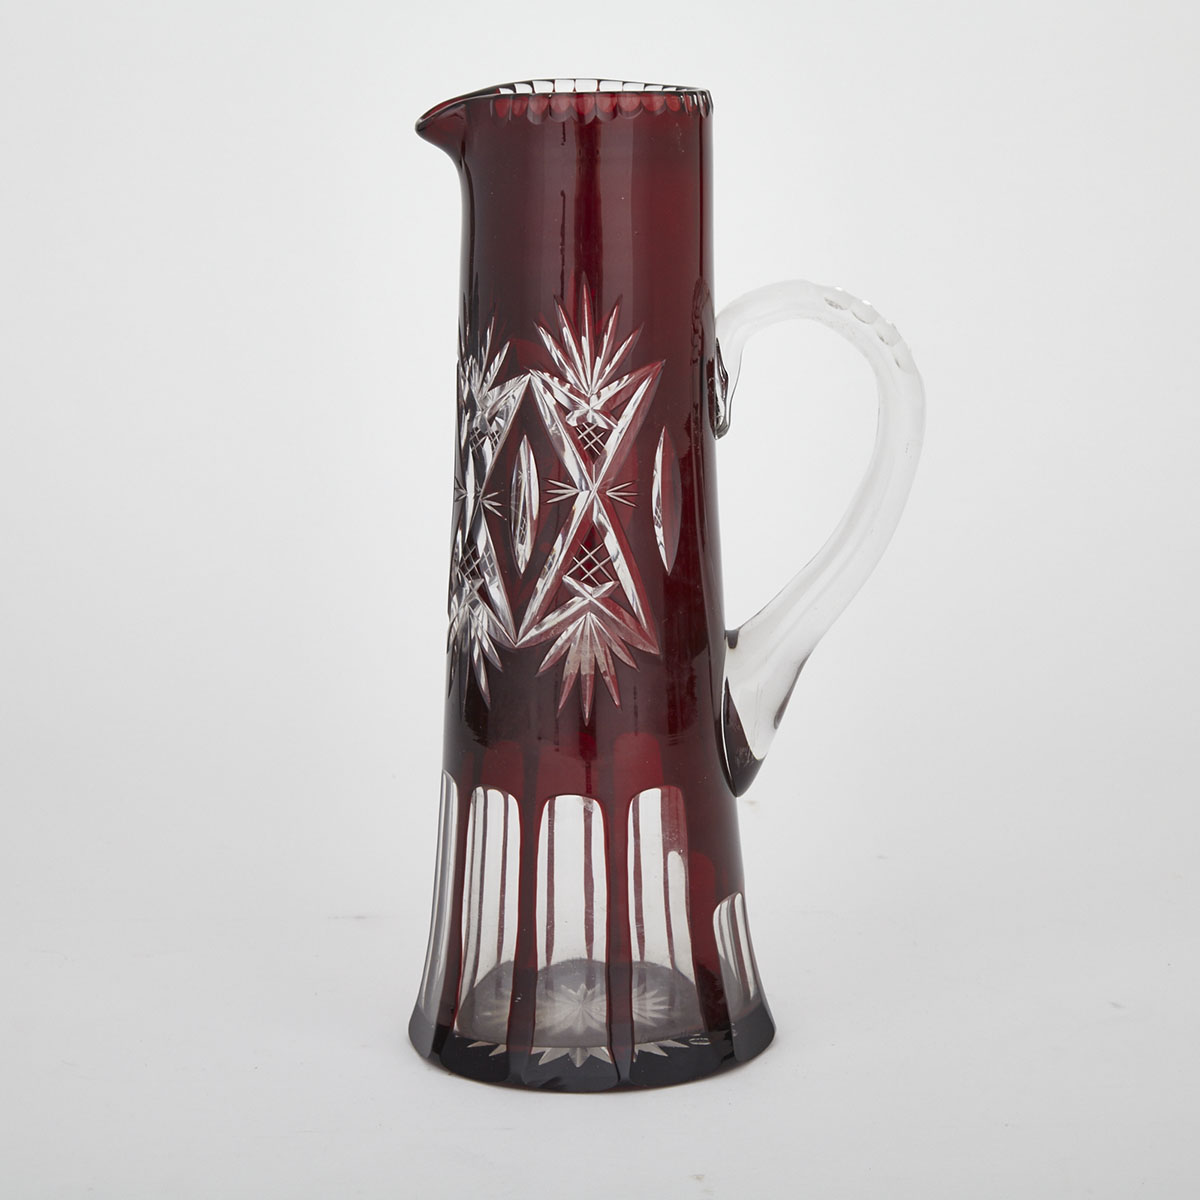 Bohemian Red Overlaid and Cut Glass Jug, 20th century